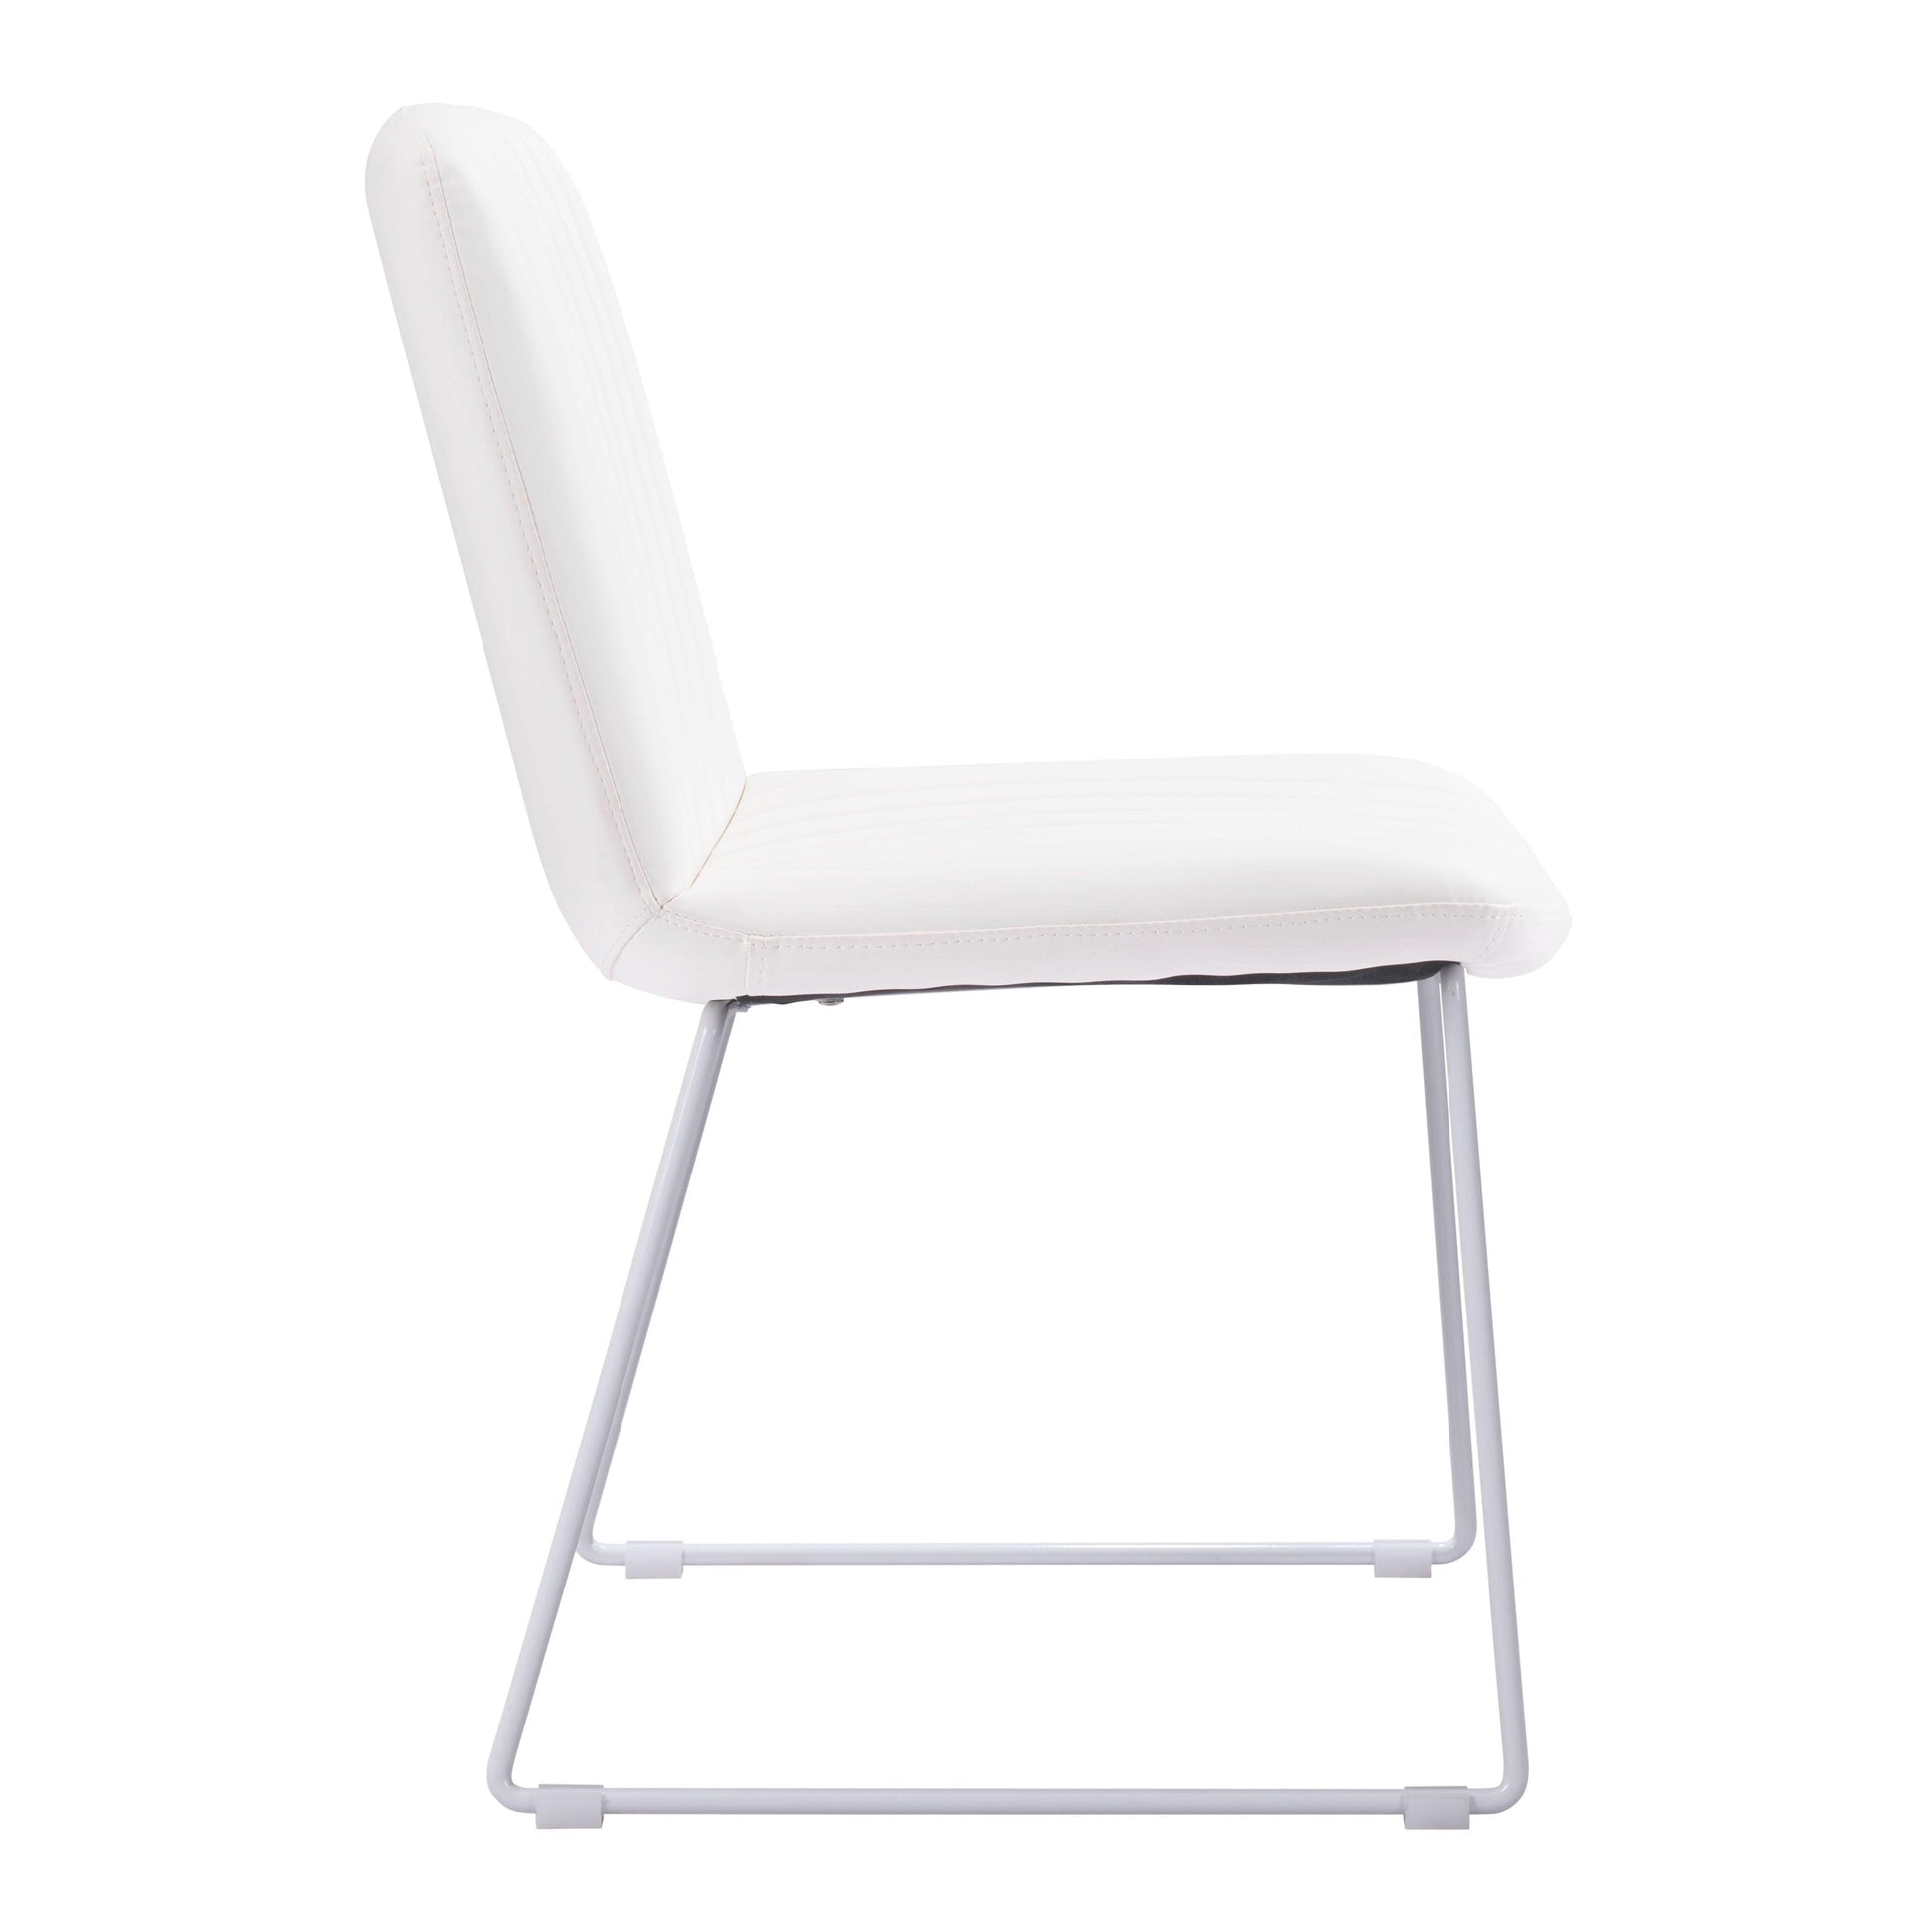 Joy Dining Chair (Set of 2) White - Sideboards and Things Back Type_Full Back, Back Type_With Back, Brand_Zuo Modern, Color_White, Depth_20-30, Finish_Powder Coated, Height_30-40, Materials_Metal, Materials_Upholstery, Metal Type_Steel, Number of Pieces_2PC Set, Product Type_Dining Height, Seat Material_Upholstery, Shape_Armless, Upholstery Type_Leather, Upholstery Type_Vegan Leather, Width_20-30